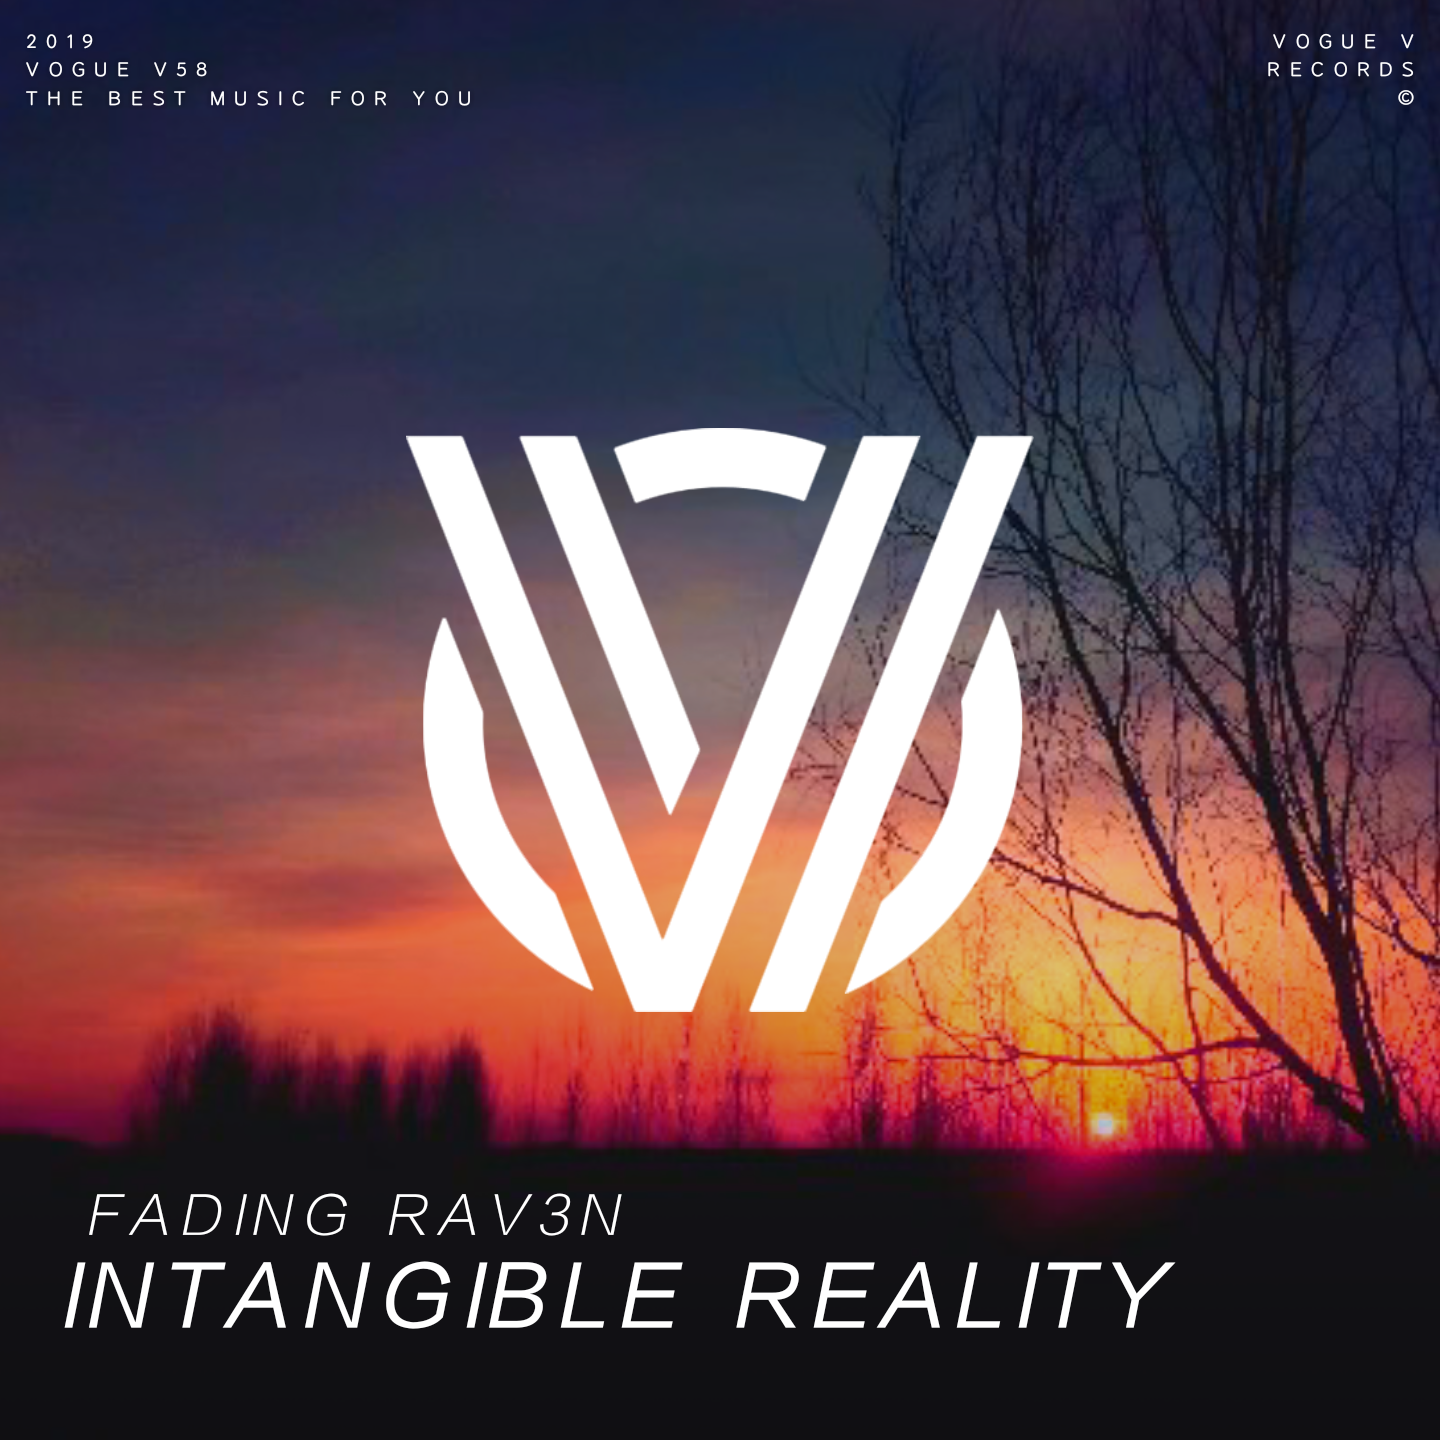 Intangible Reality